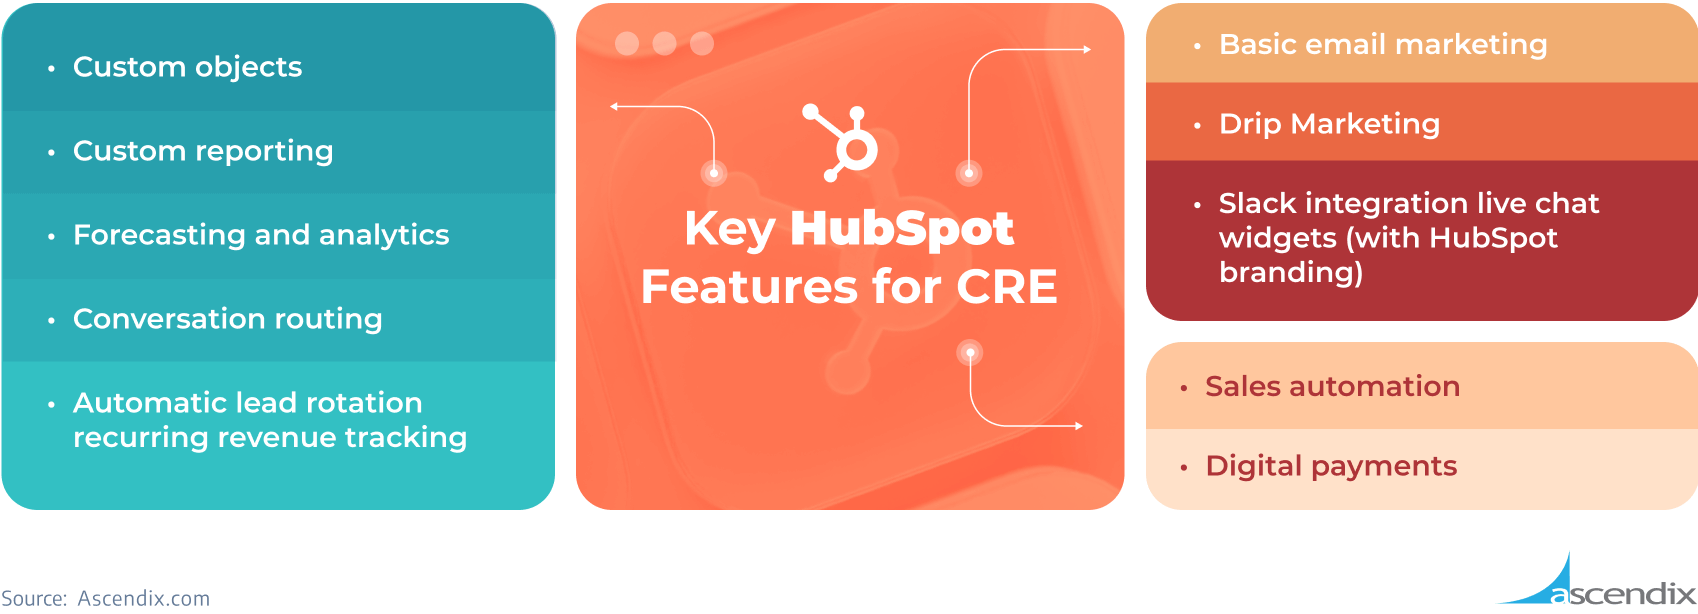 HubSpot for Real Estate CRM Features